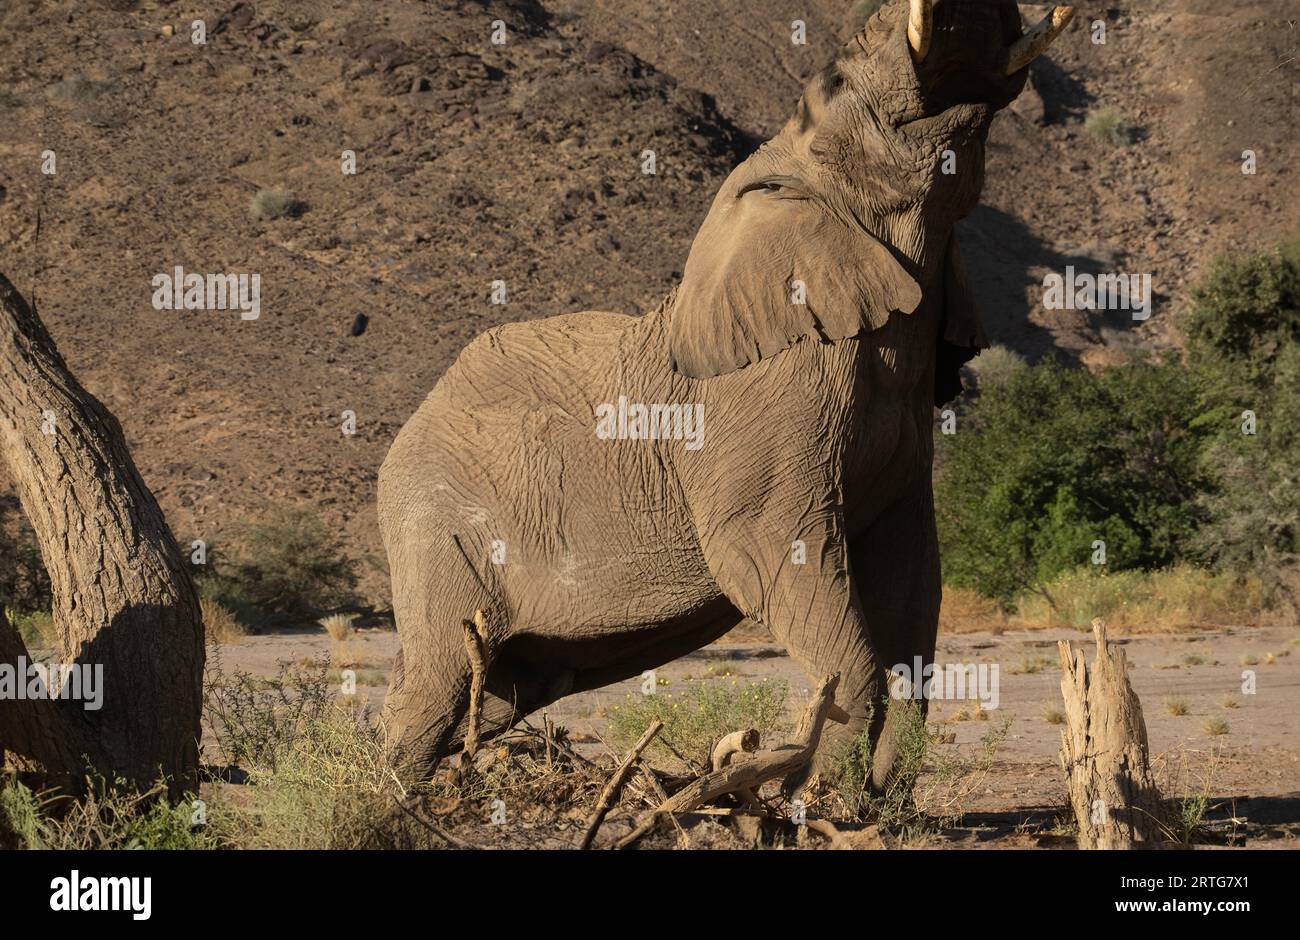 Elephant eating from tree using trunk in Namibia Stock Photo